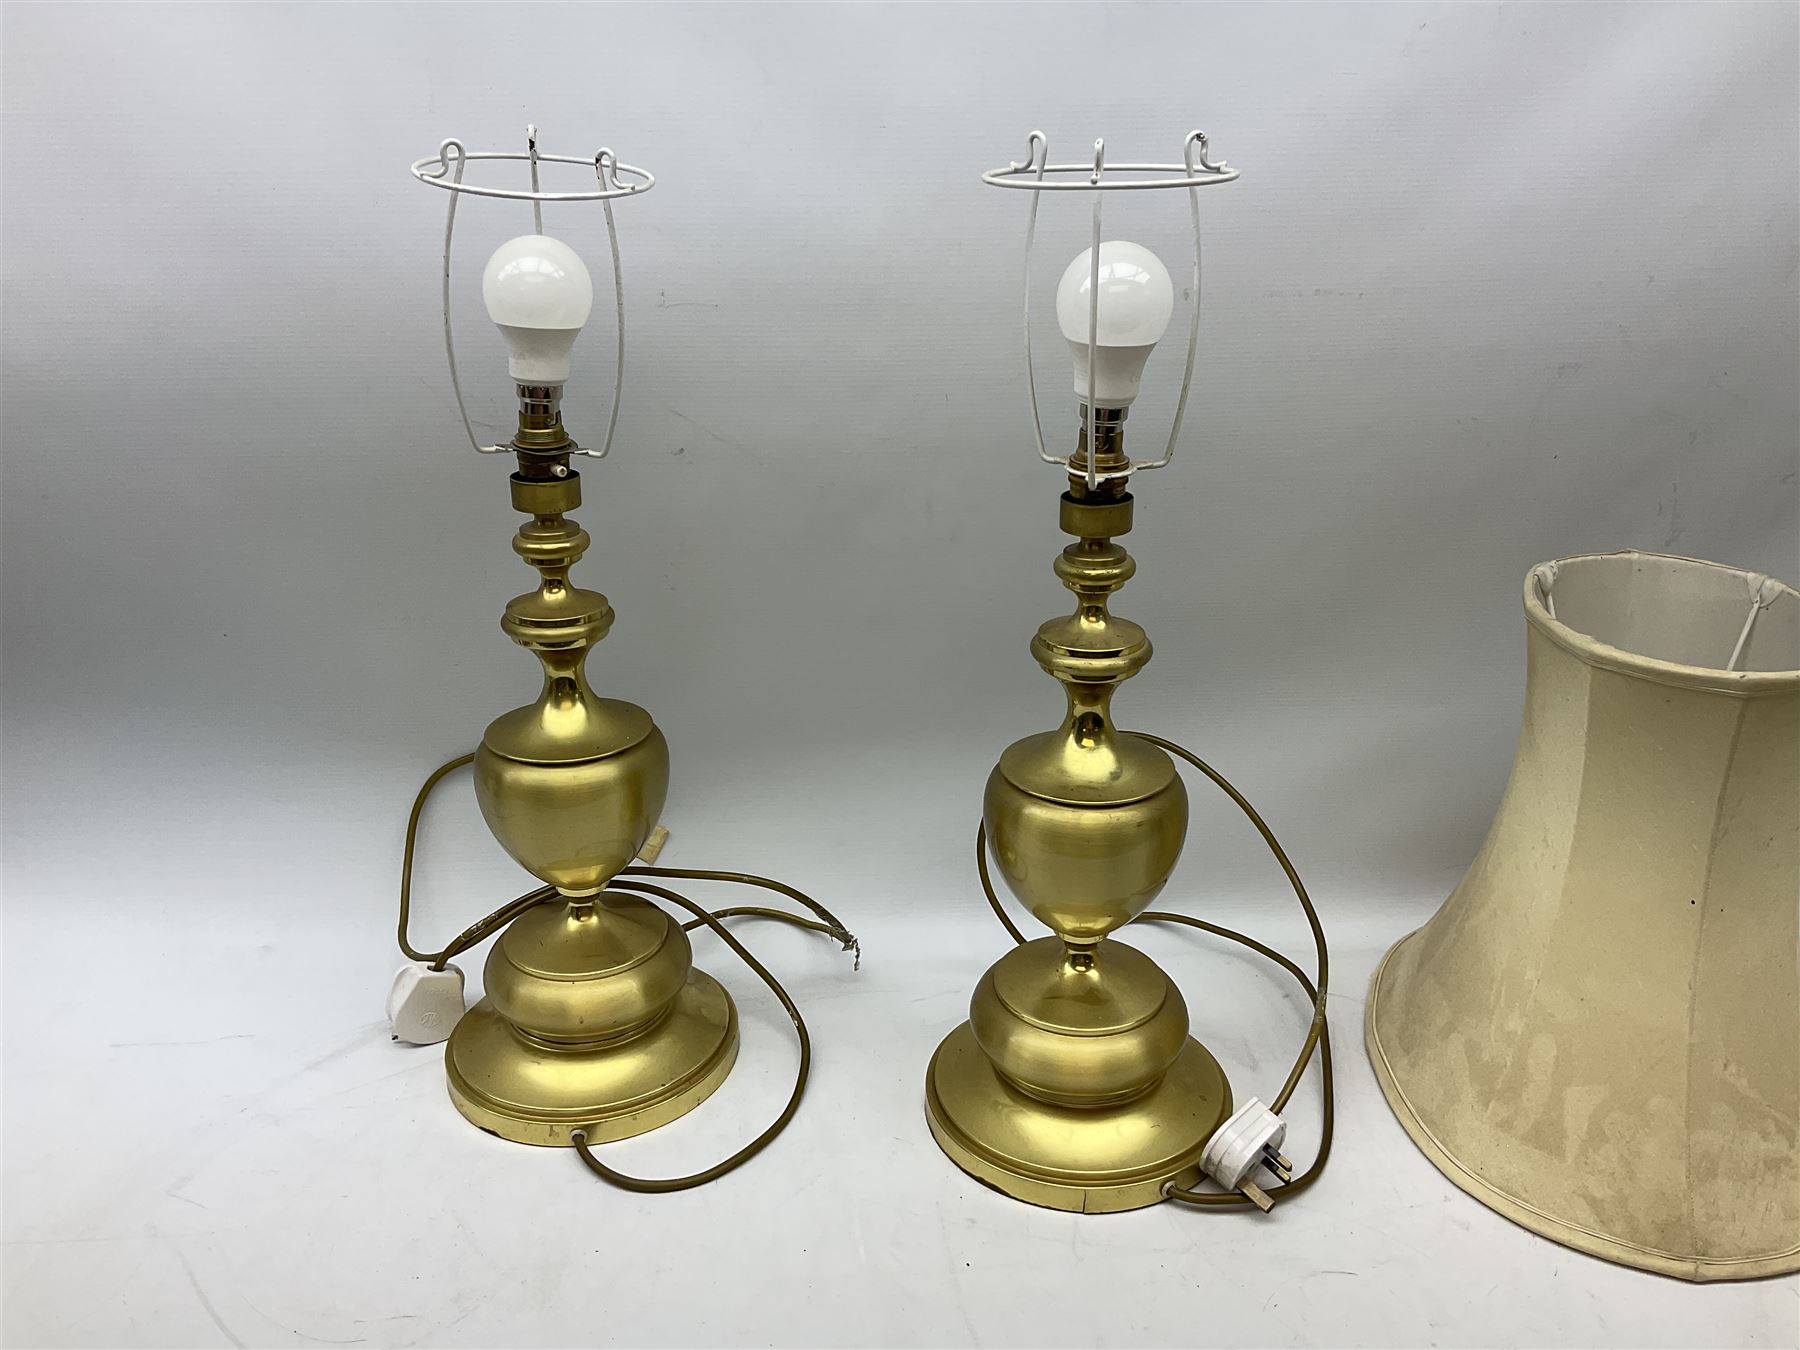 Two brassed table lamps with cream shades - Image 9 of 9